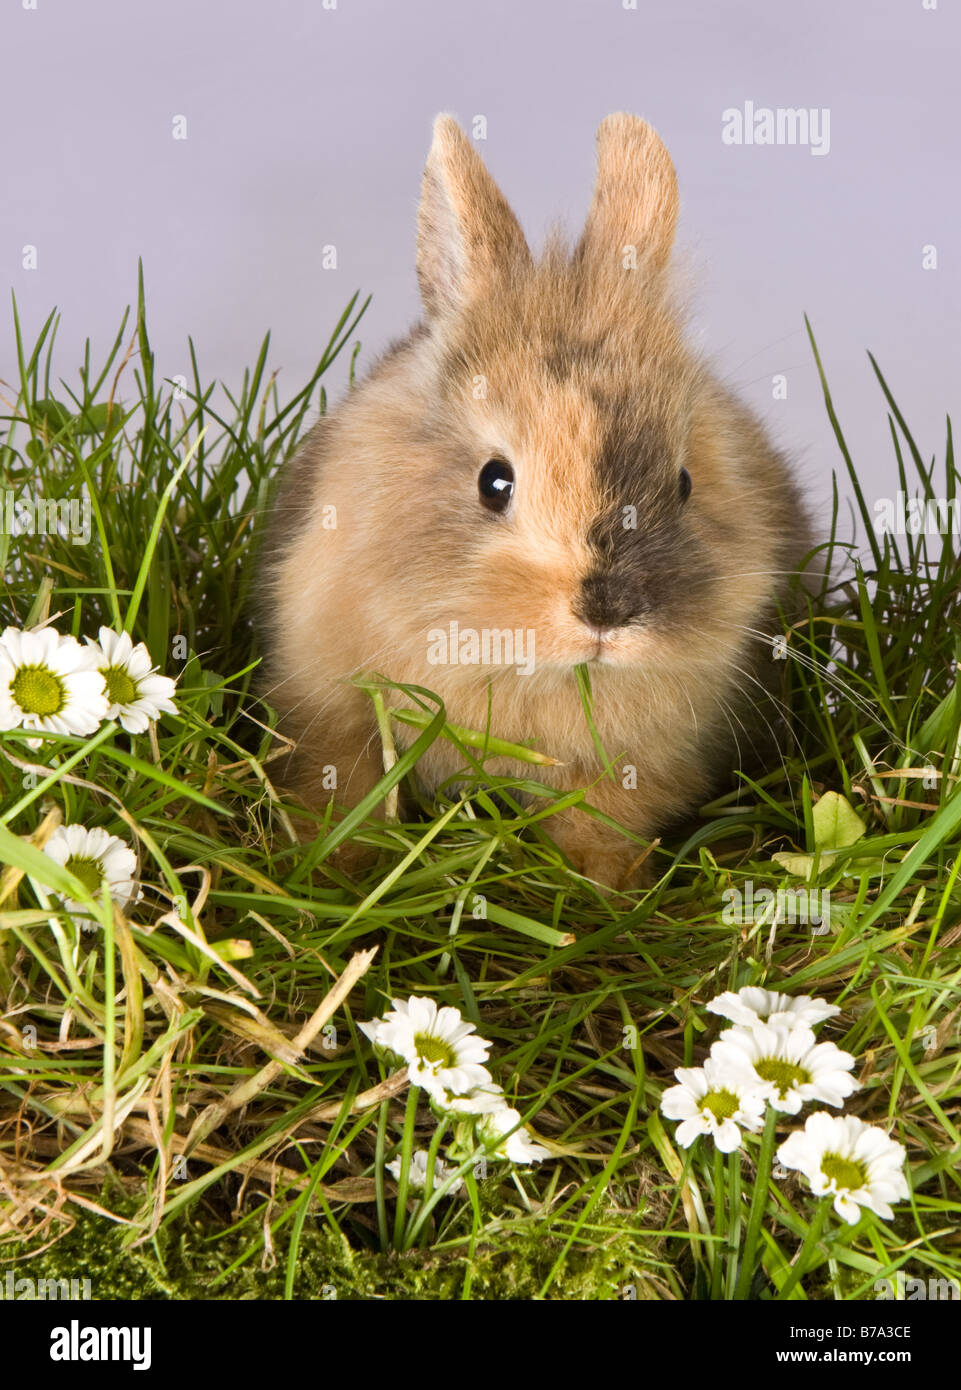 Young brown easter rabbit eating grass and daisies Stock Photo